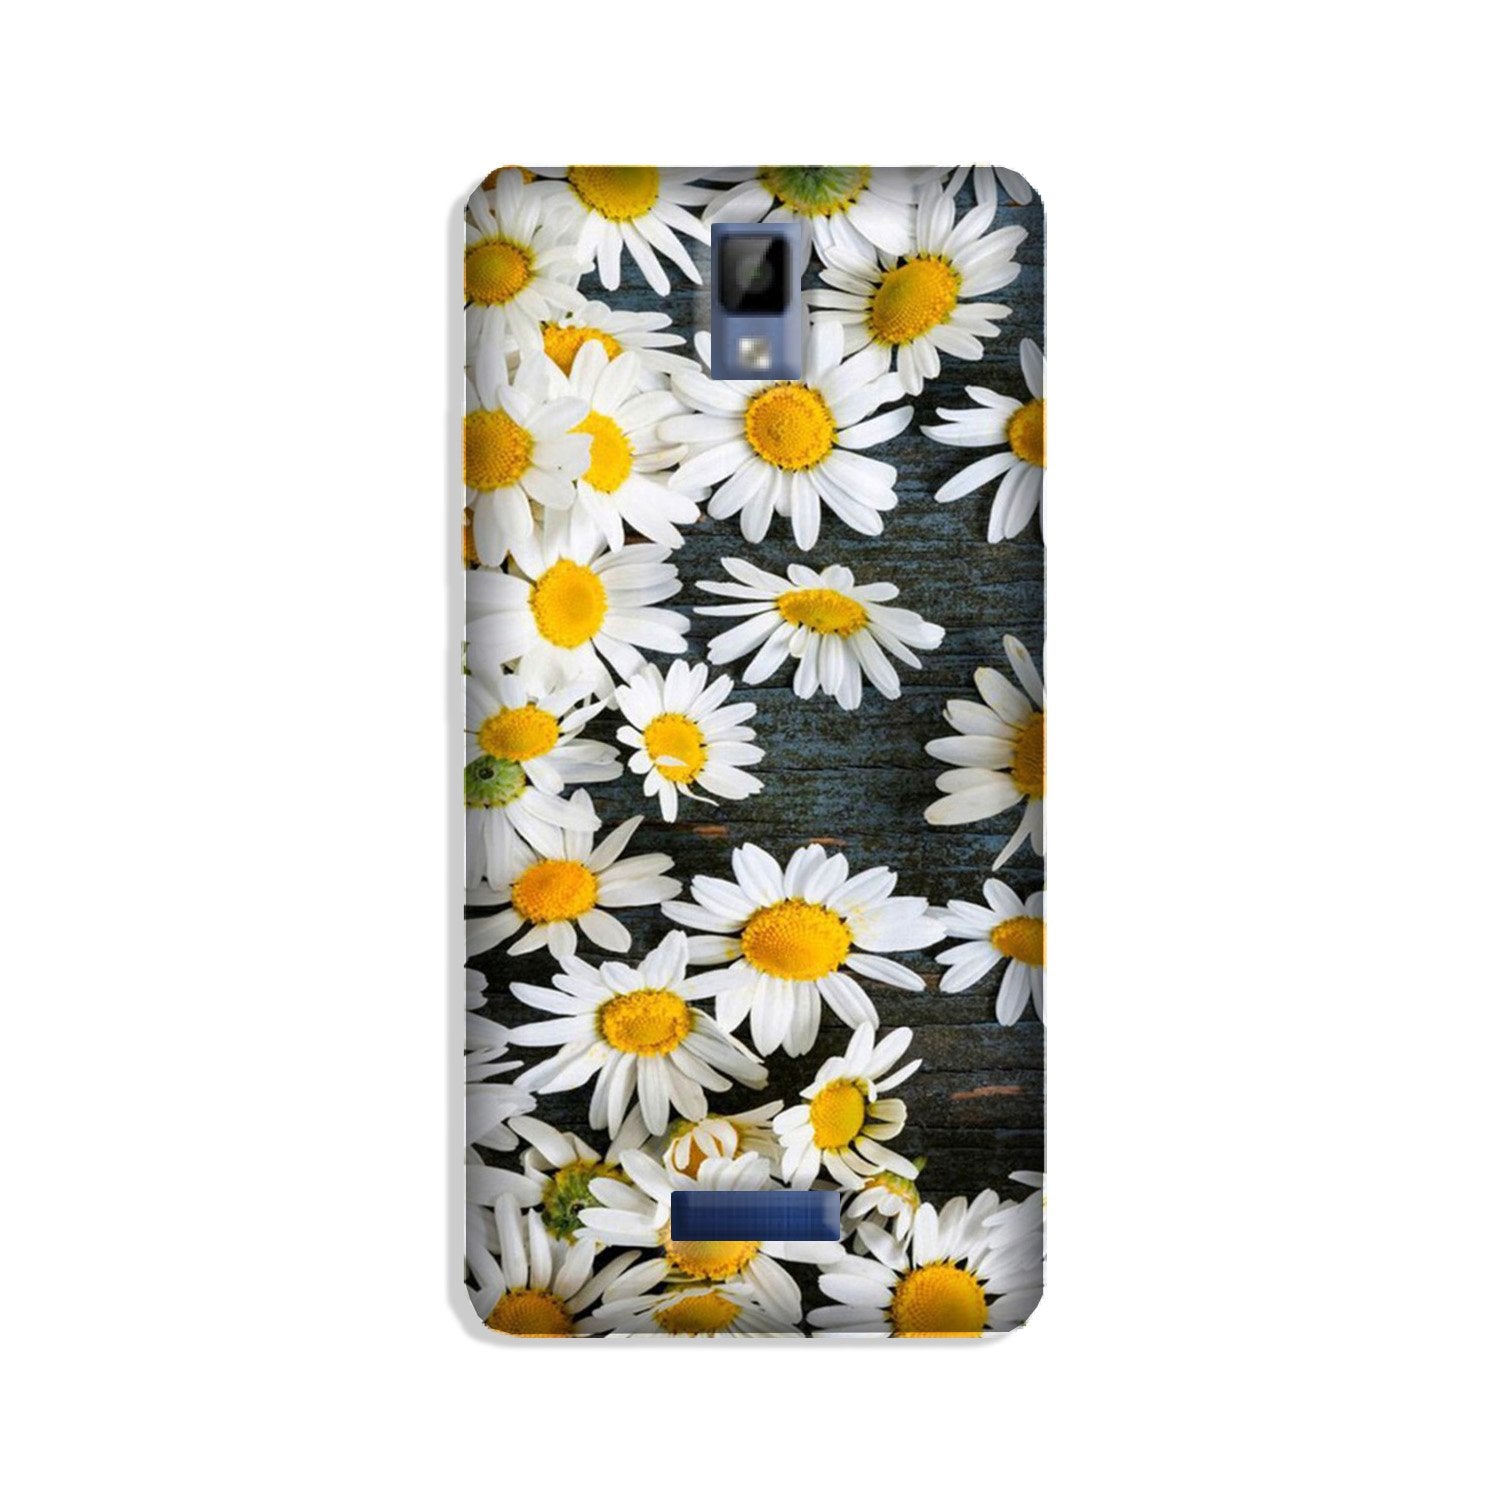 White flowers2 Case for Gionee P7